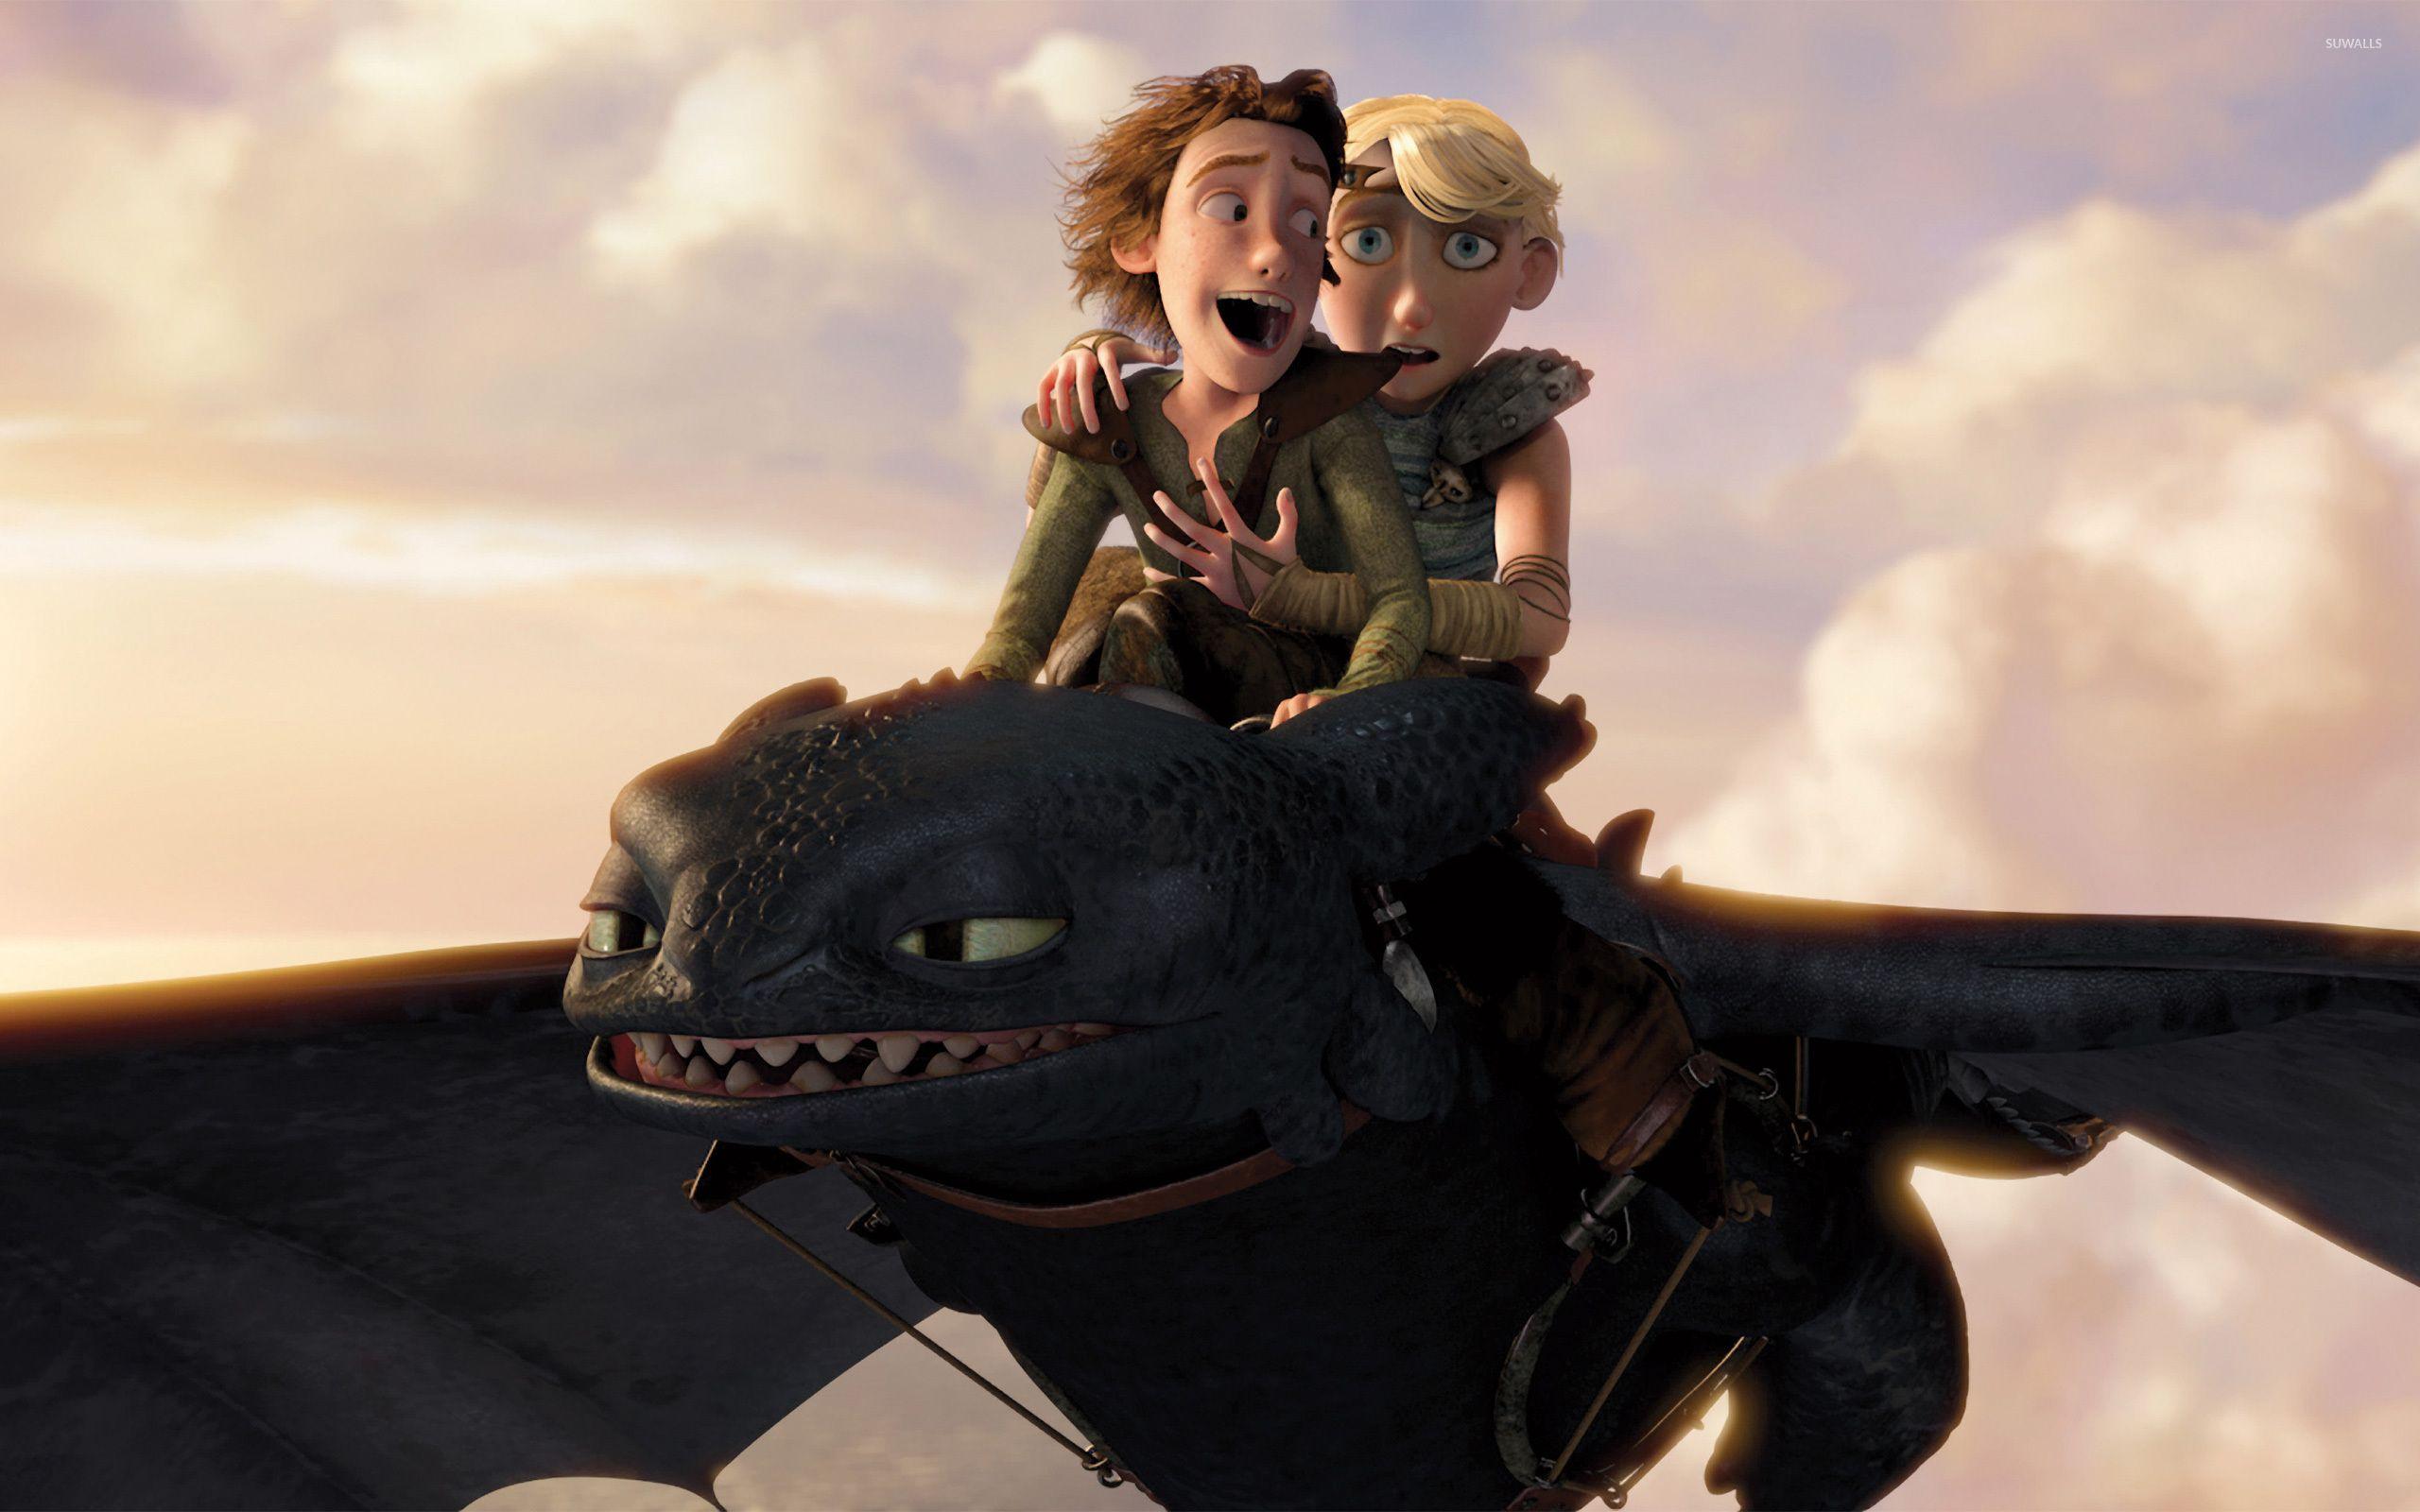 How to Train Your Dragon wallpaper image picture downloadD